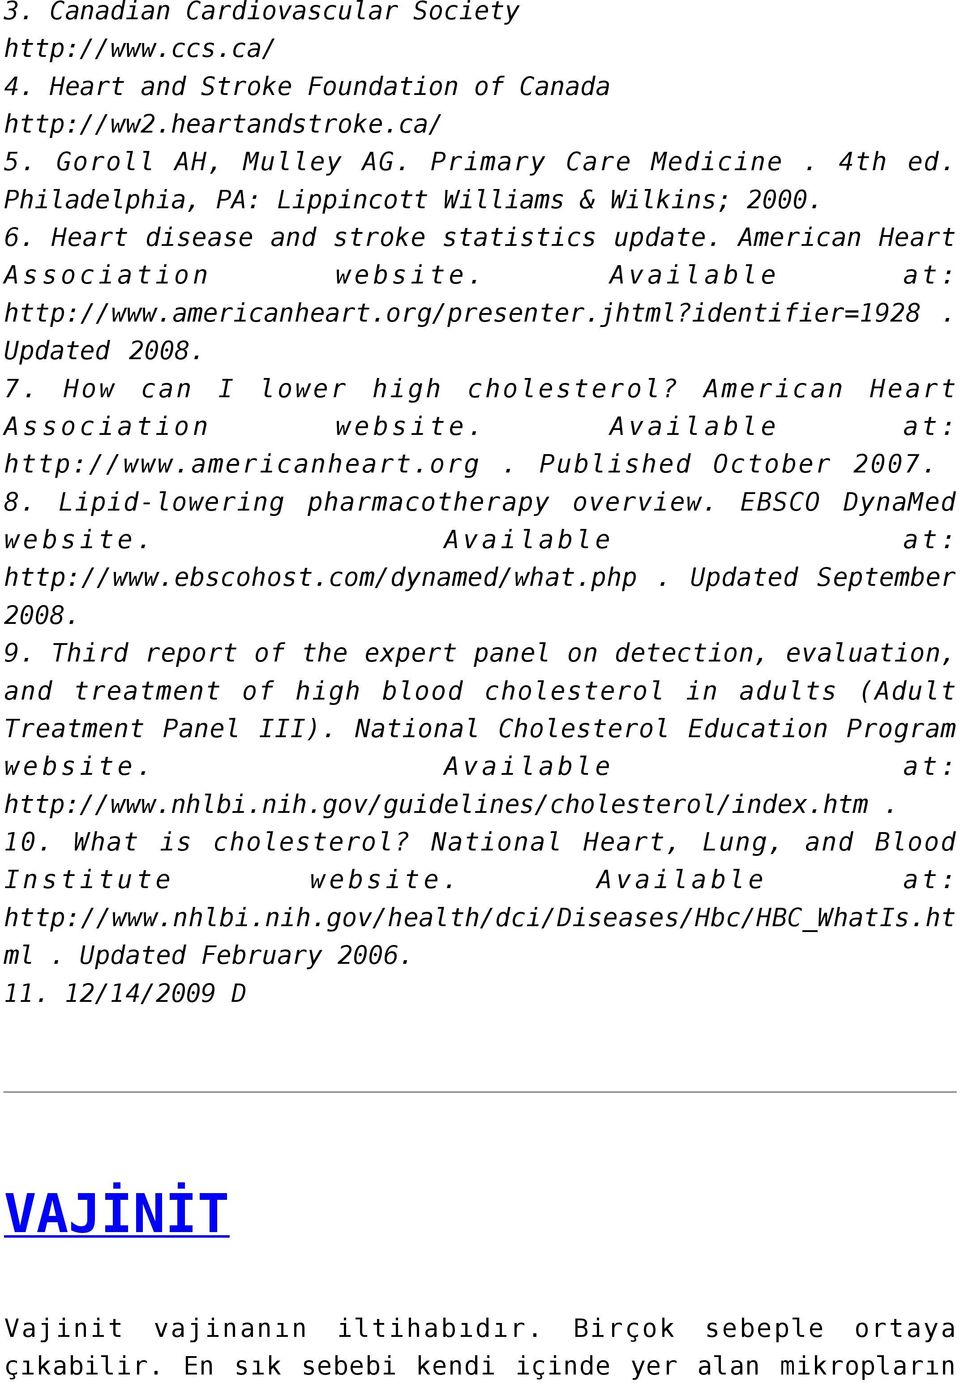 identifier=1928. Updated 2008. 7. How can I lower high cholesterol? American Heart Association website. Available at: http://www.americanheart.org. Published October 2007. 8.